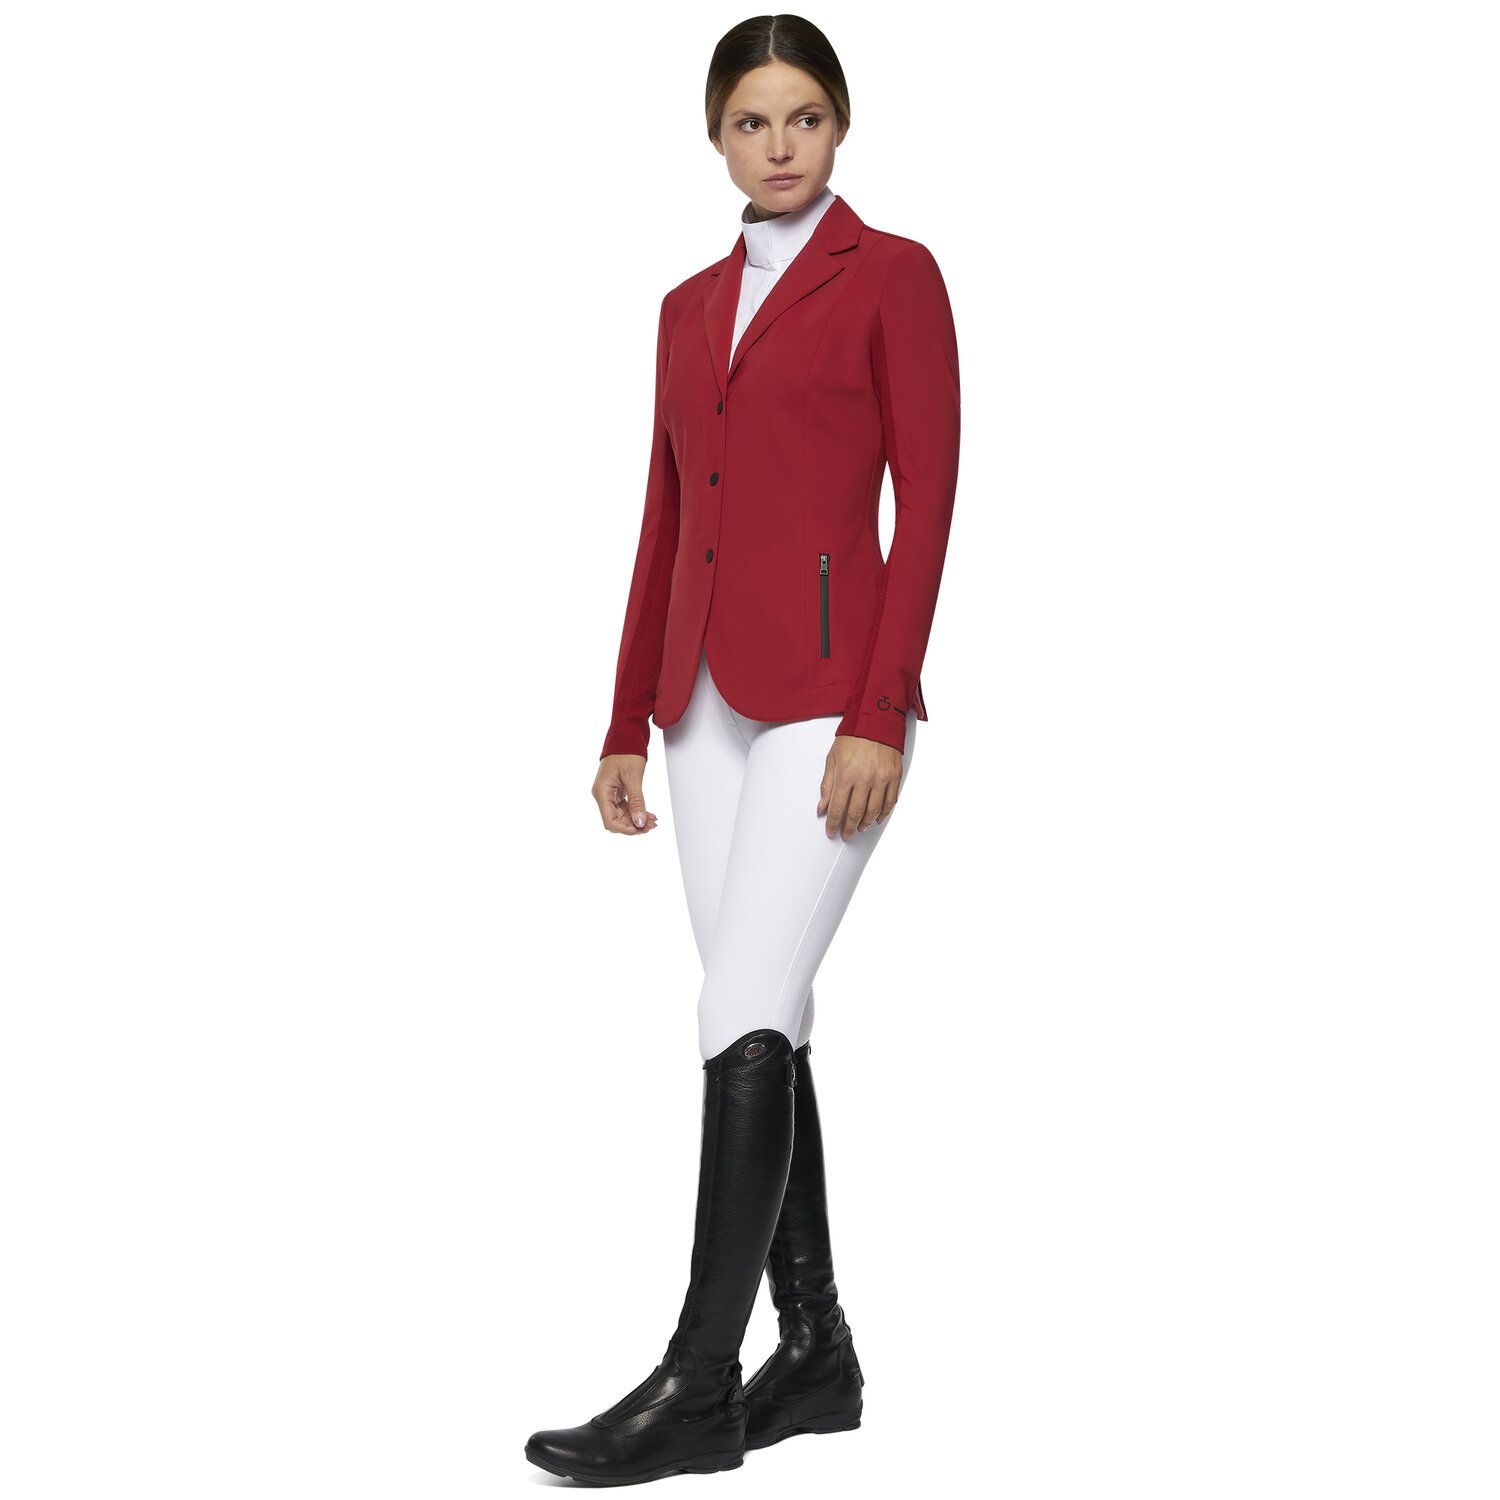 Cavalleria Toscana Women's REVO zip riding jacket with technical knit inserts RED-3